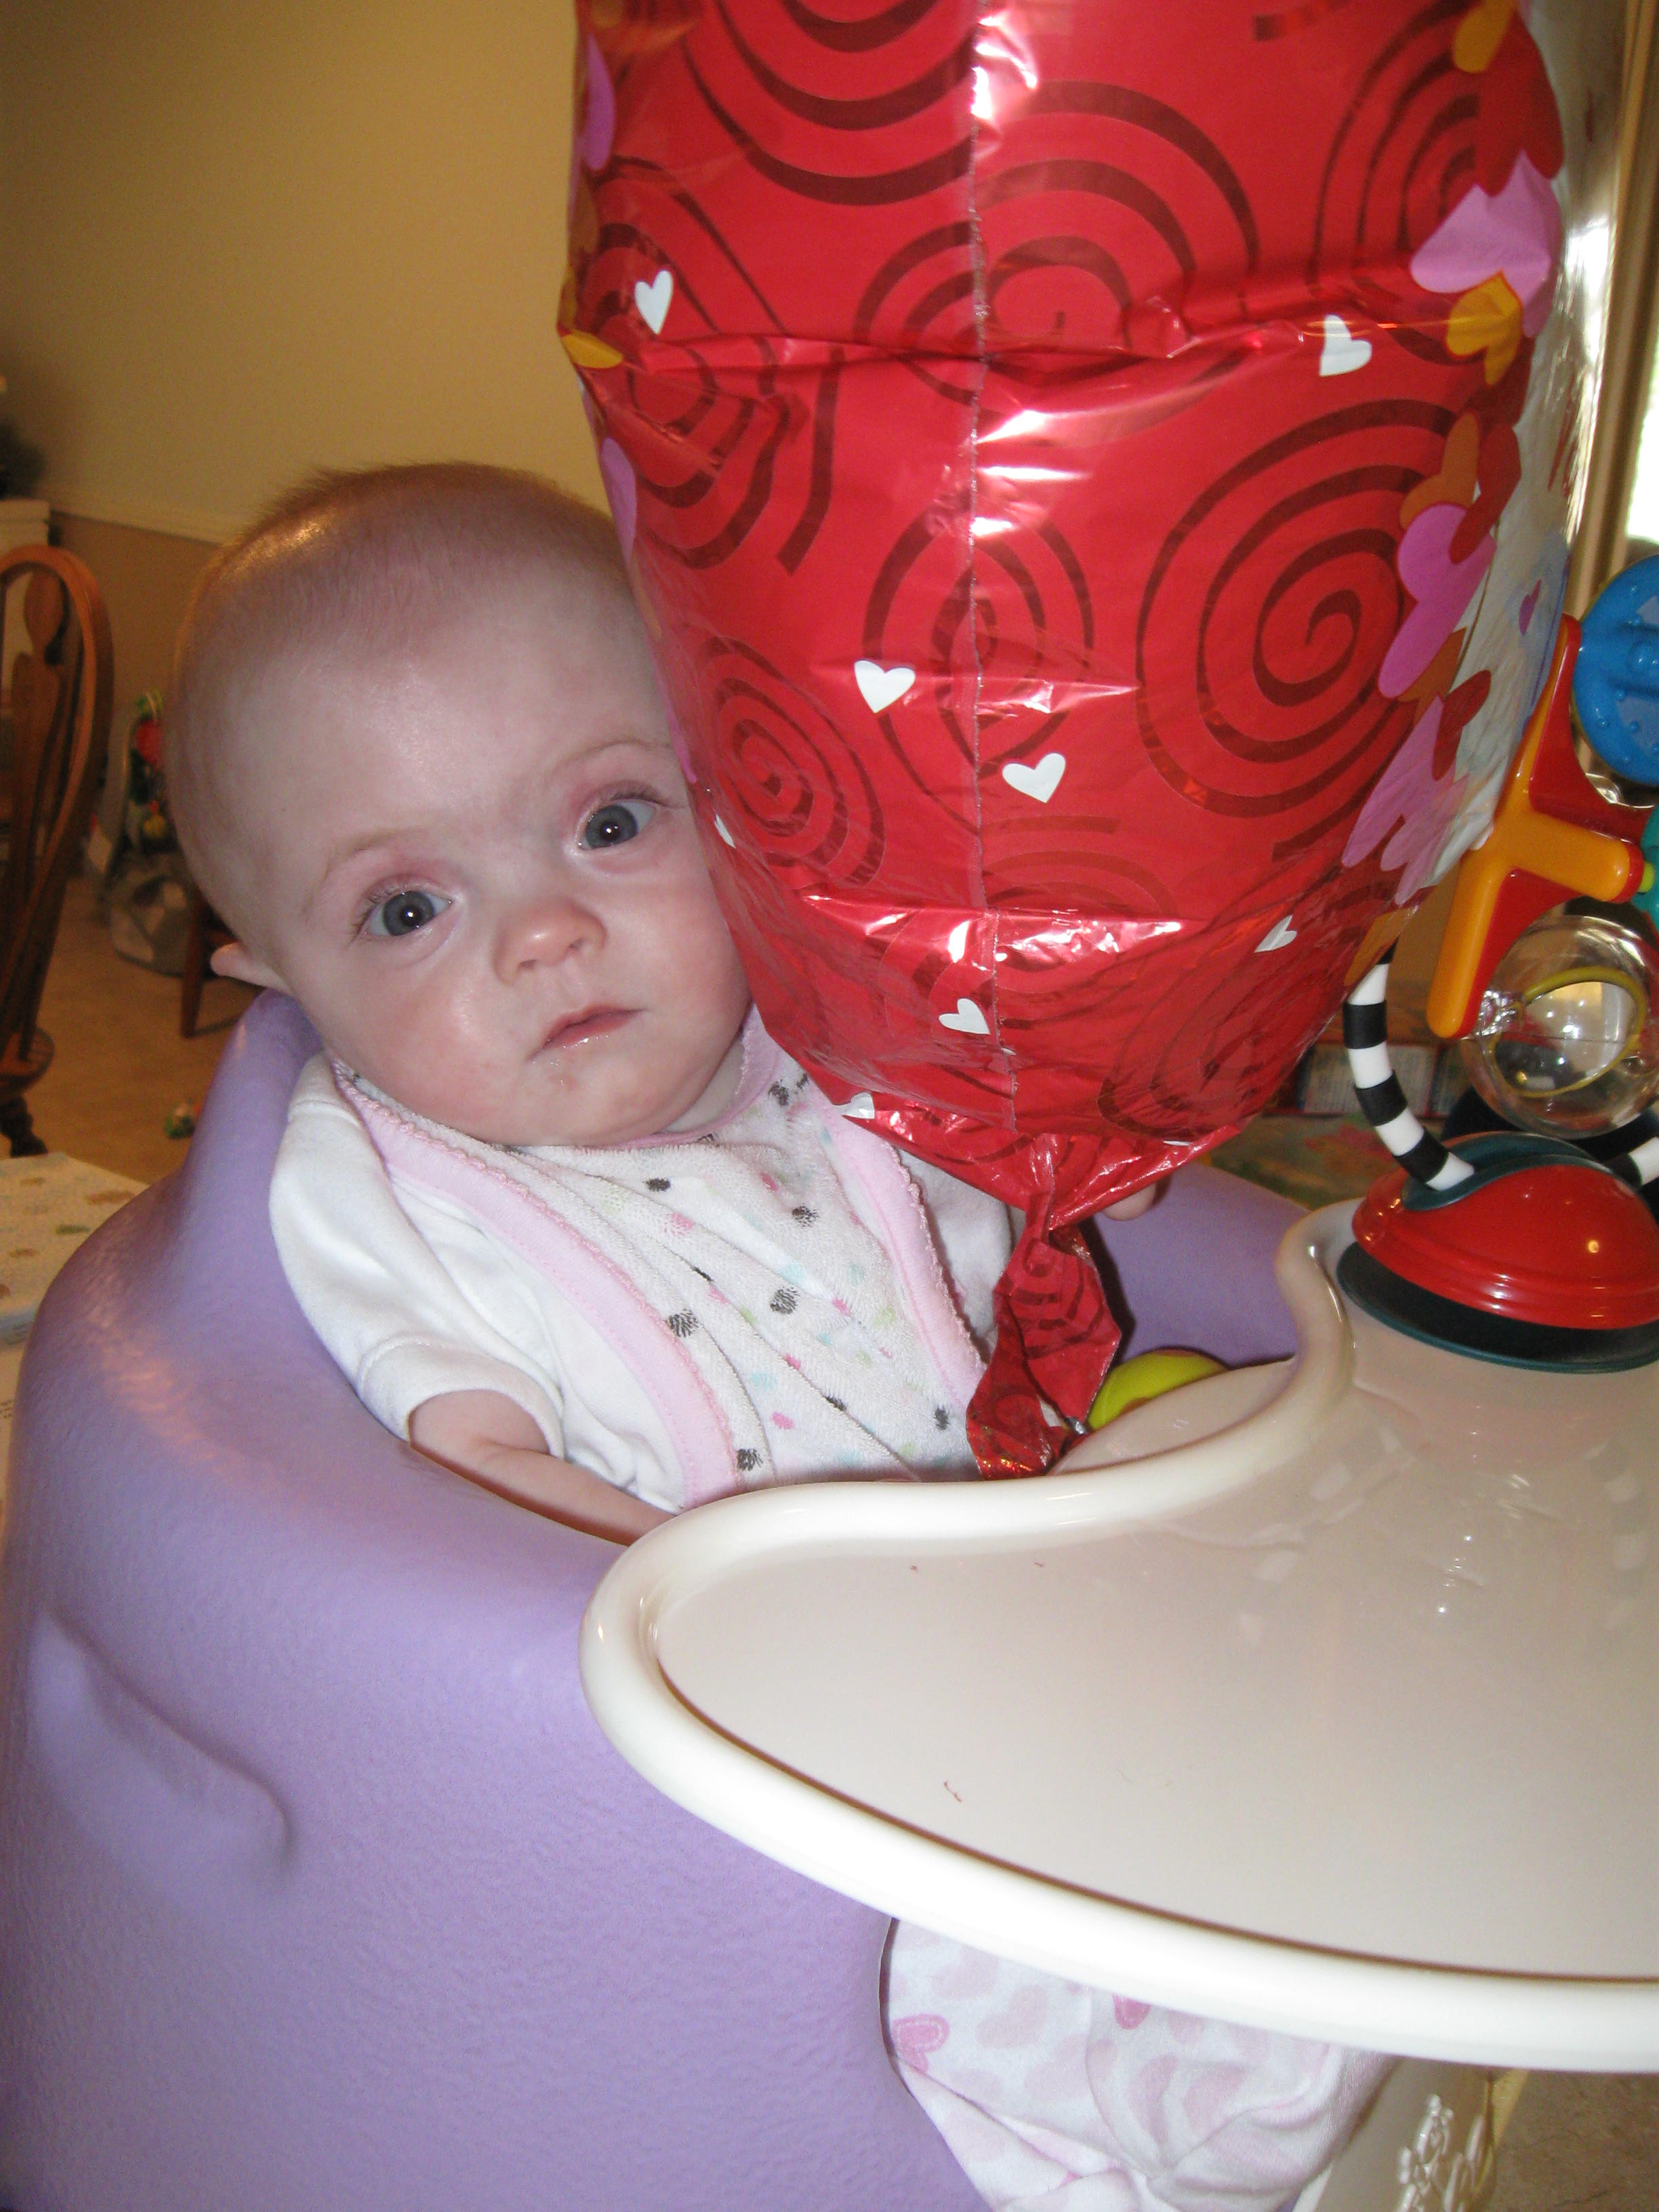 Here she's peeking out from behind her new favorite toy - and Mom's best deal ever - a crinkly mylar balloon from Dollar Tree.  What a great deal!